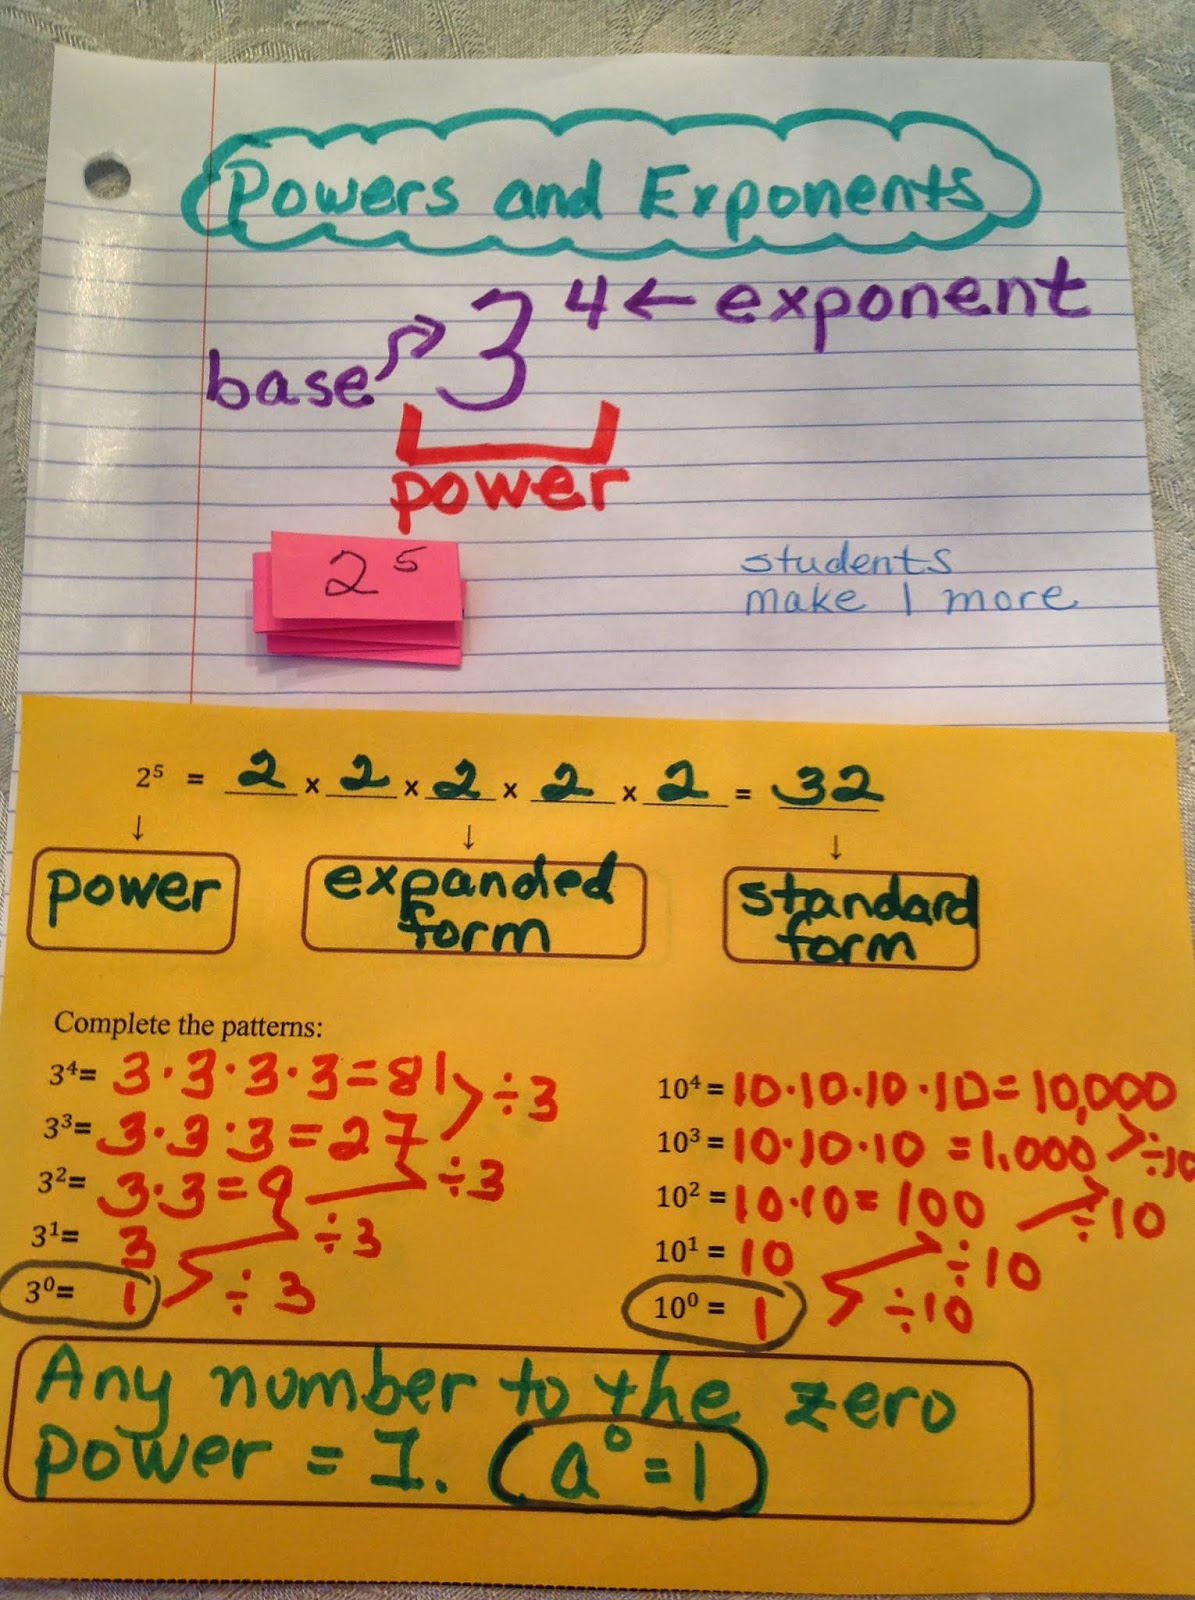 exponent-rules-and-examples